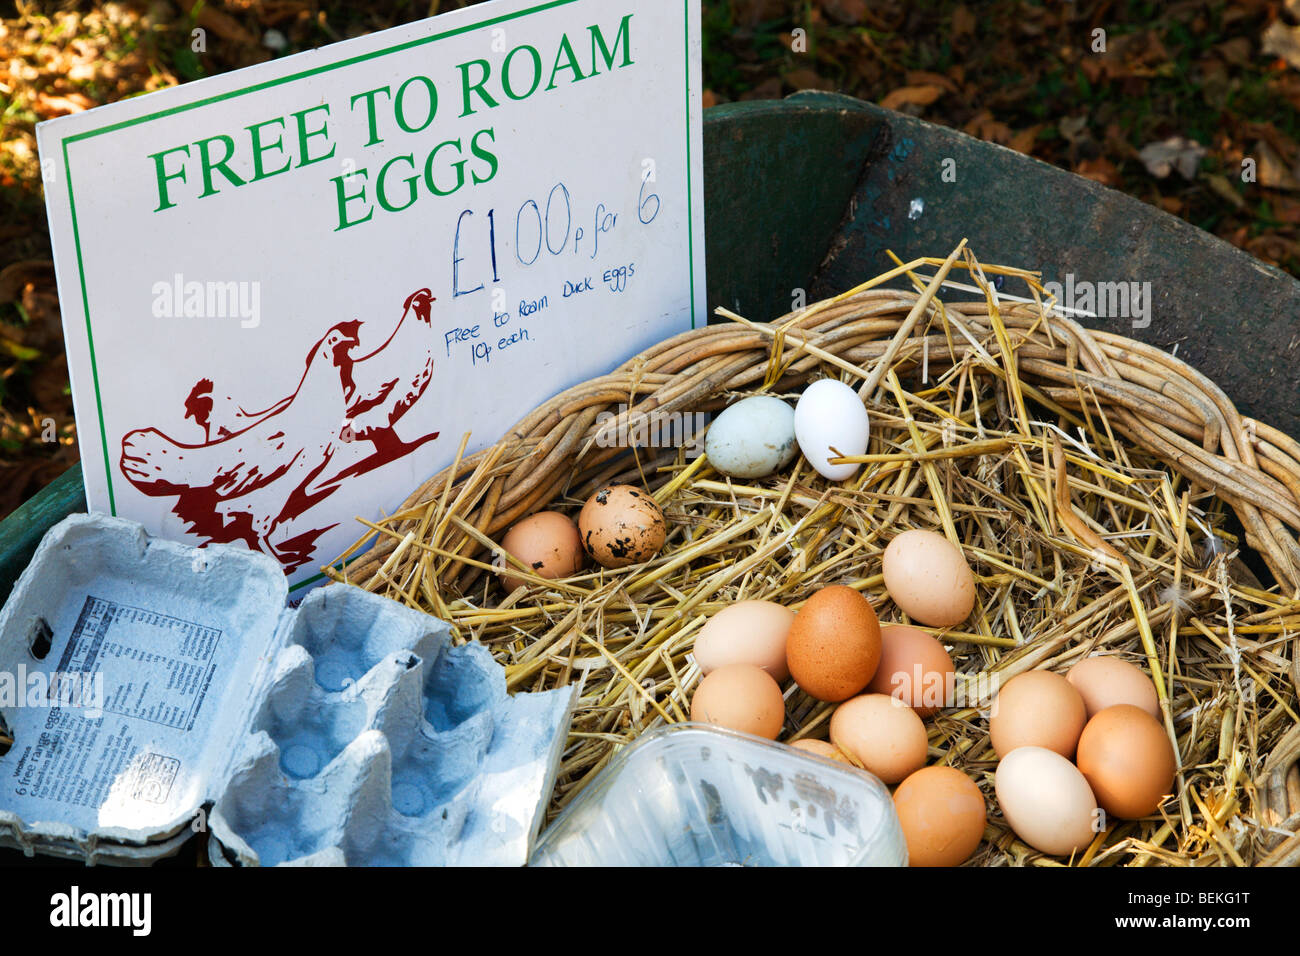 Free to Roam Eggs for sale at a farm Bures Suffolk England Stock Photo